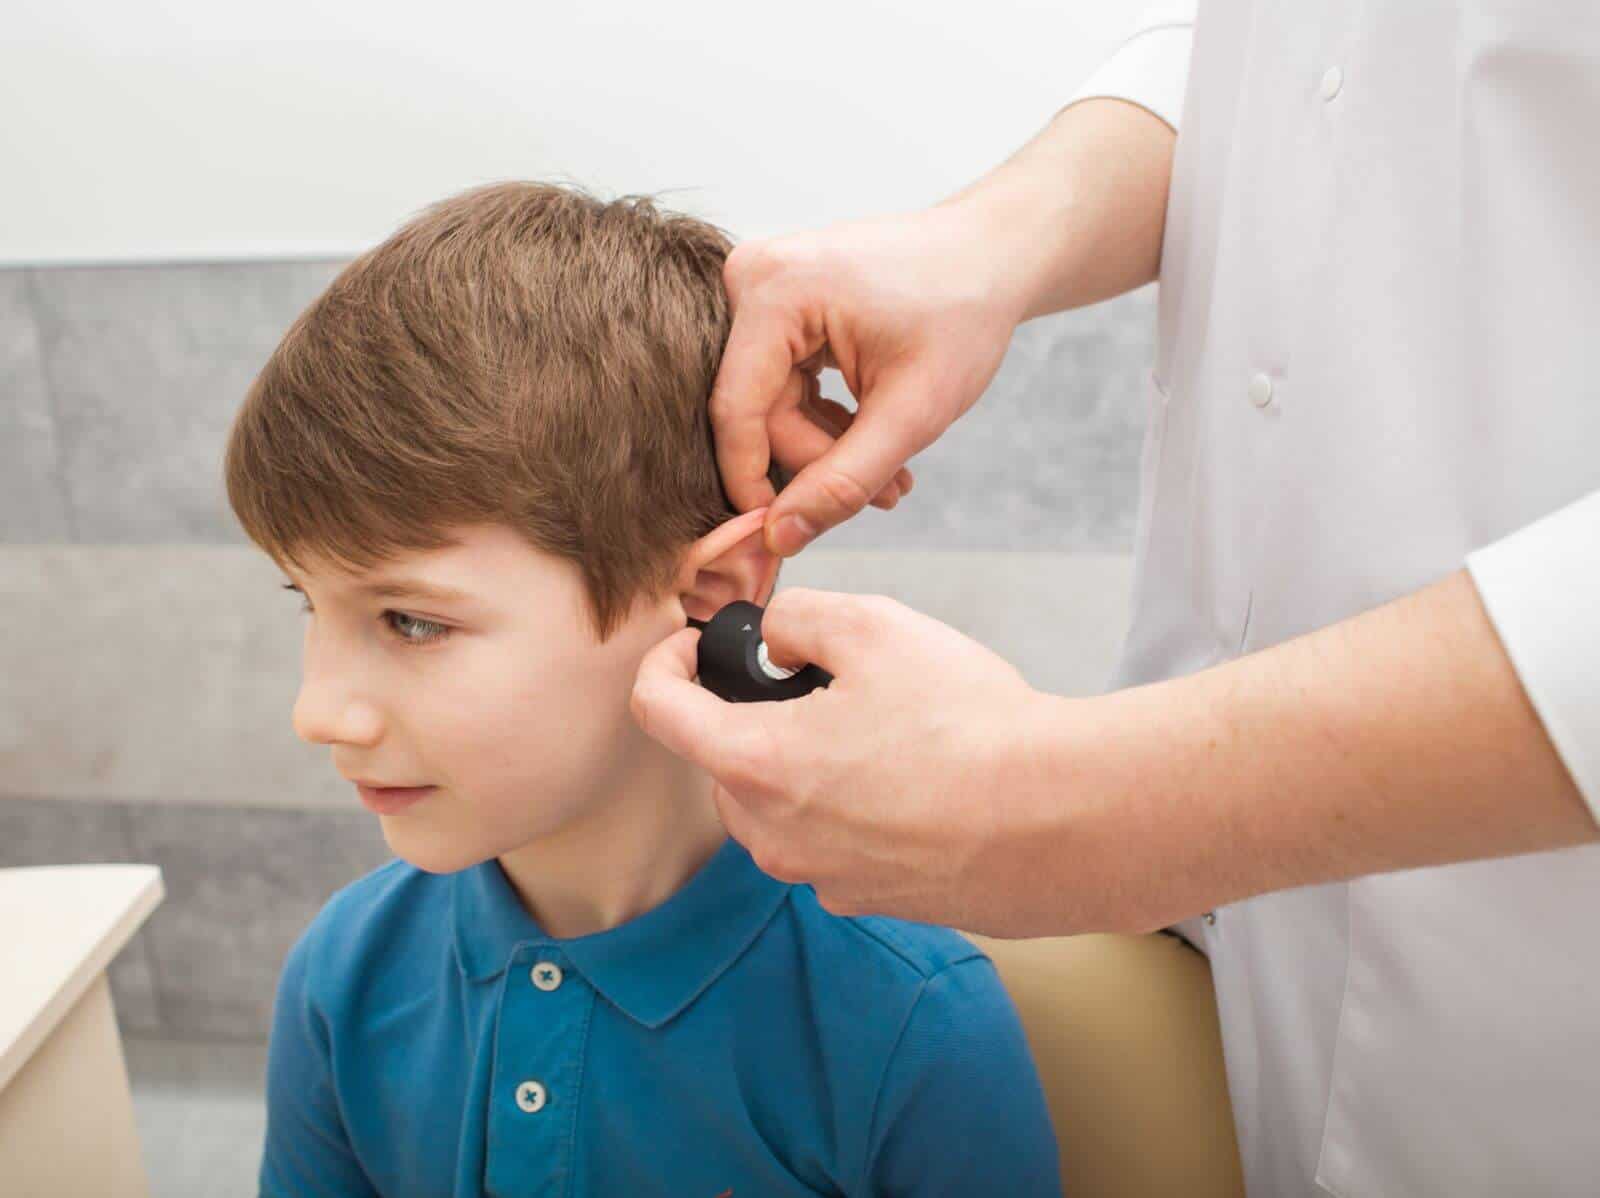 How Can Parents Promote Self-Advocacy in Children with Hearing Loss?